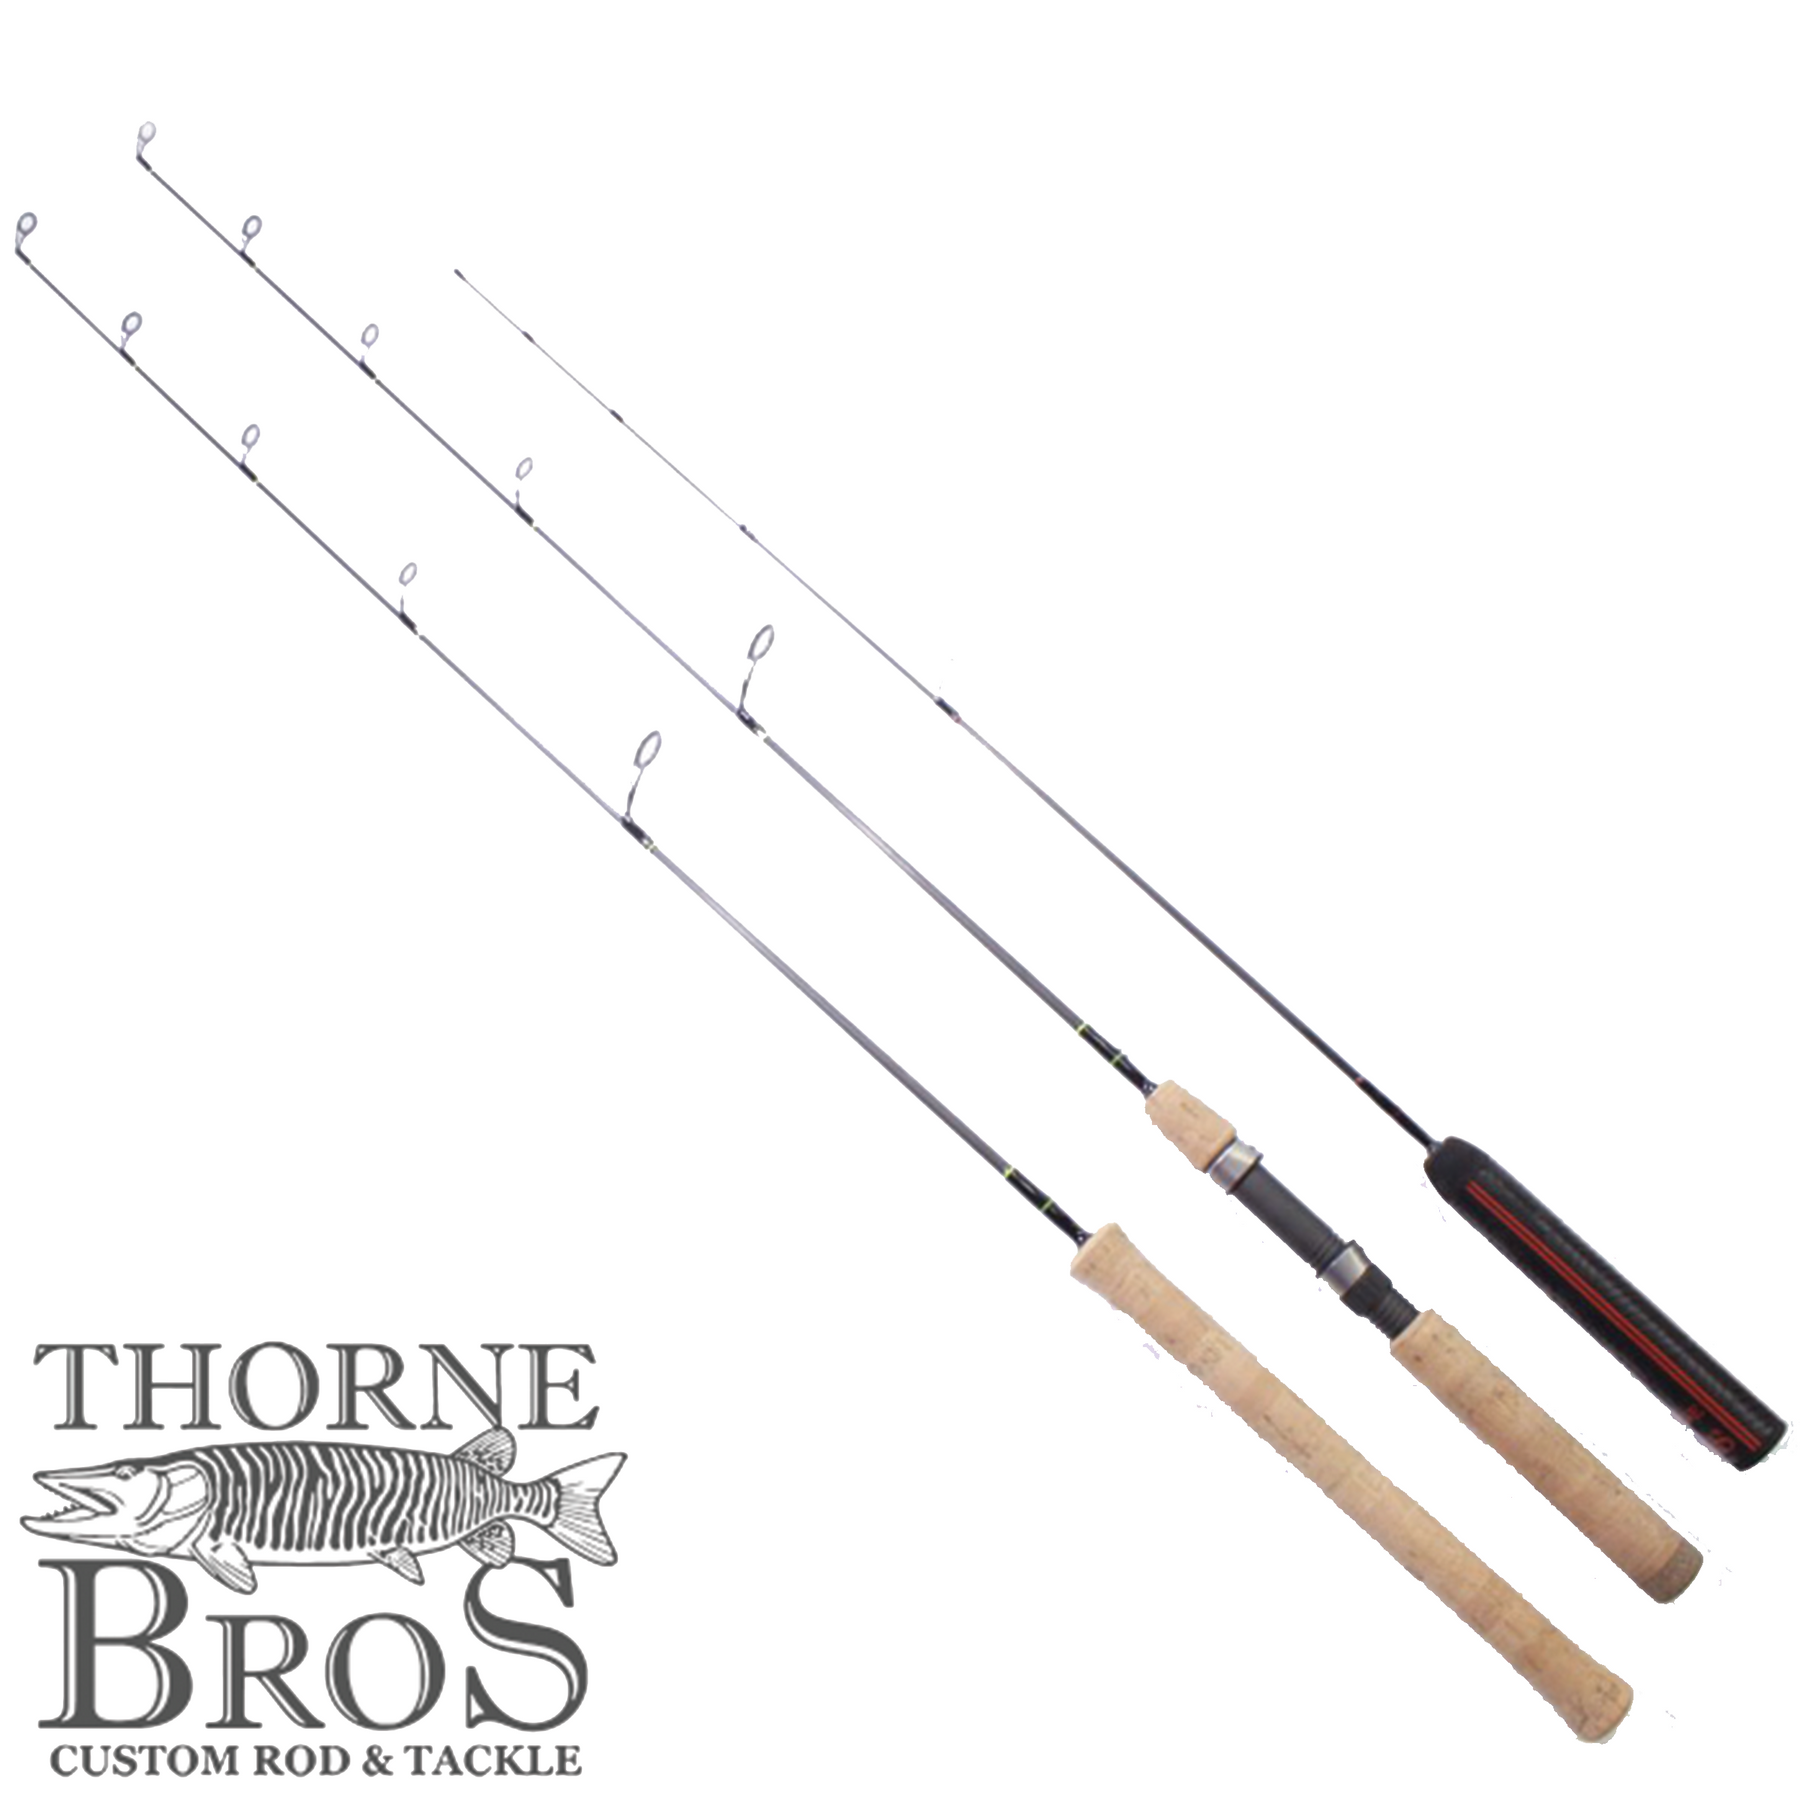 Building Custom Fishing Rods For Over 20 Years - Find Your New